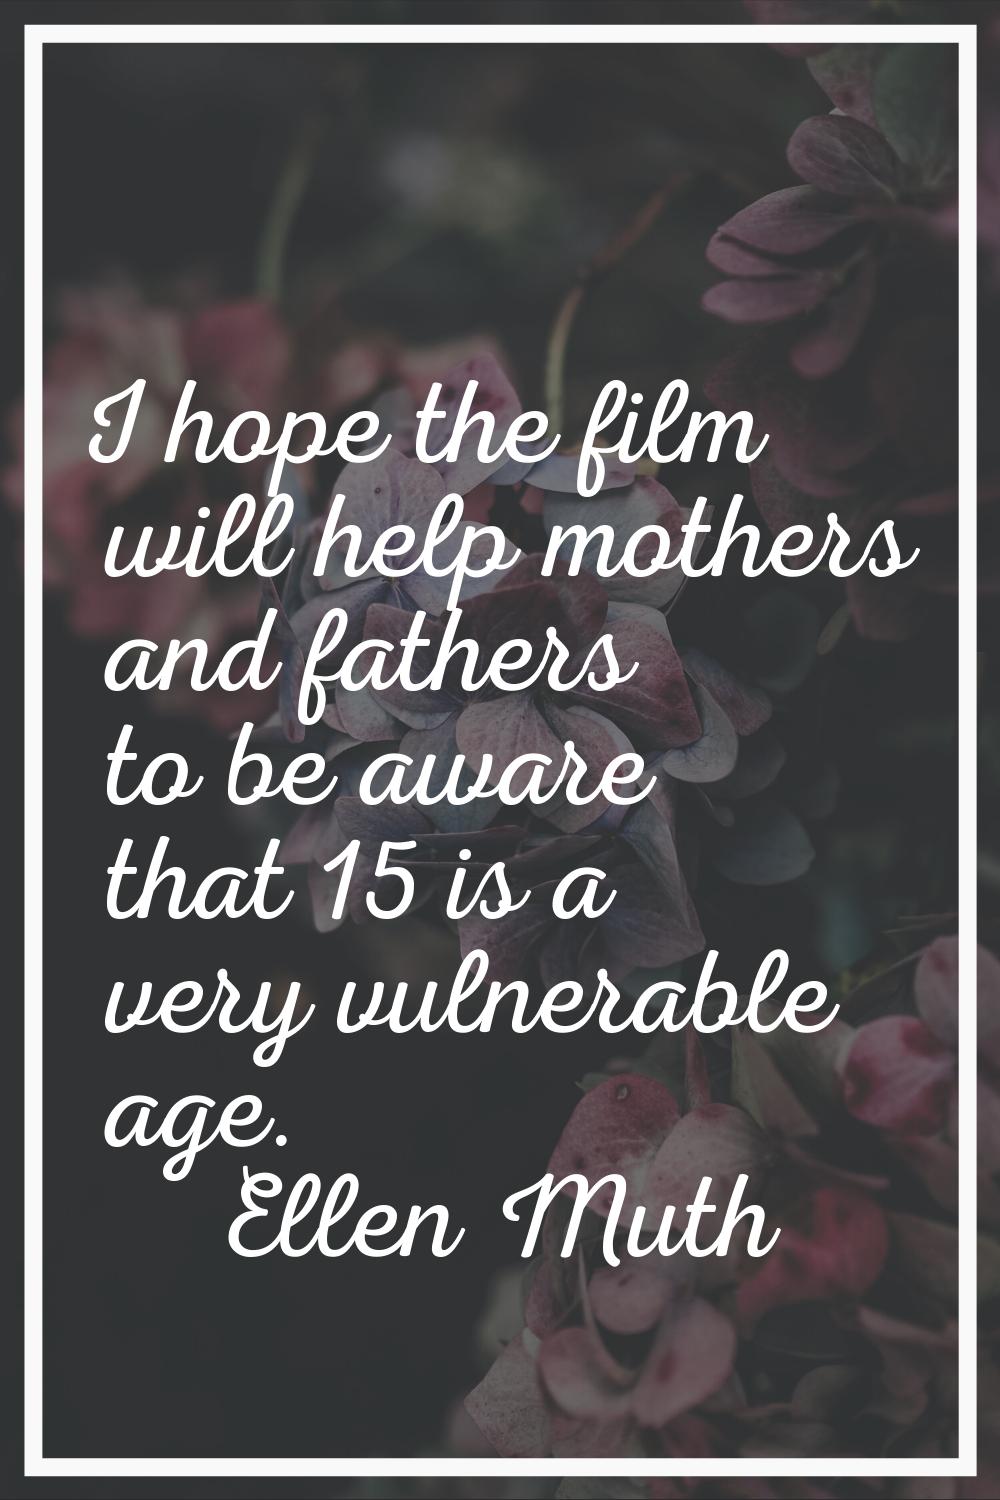 I hope the film will help mothers and fathers to be aware that 15 is a very vulnerable age.